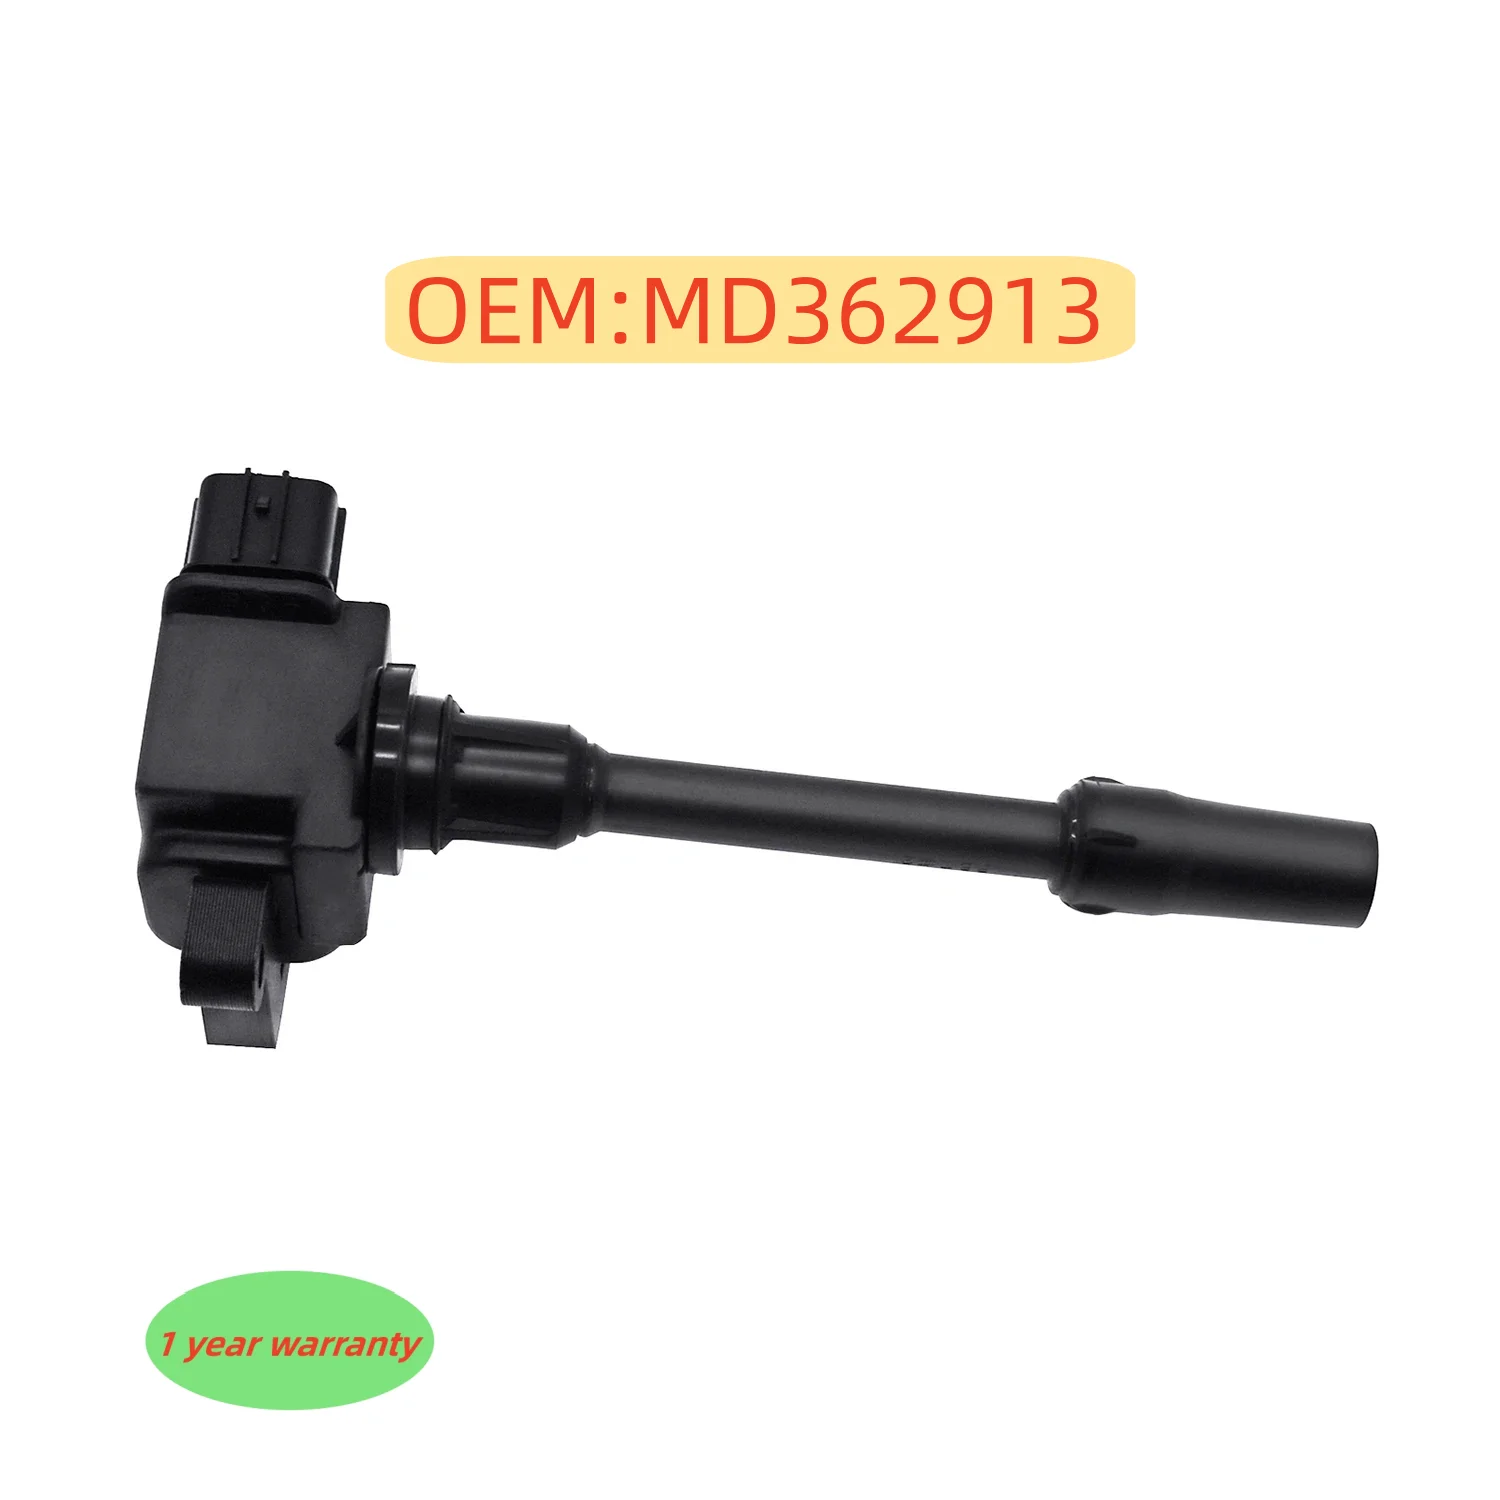 

6PCS Ignition Coil High quality H6T12471A For Mitsubishi Lancer Mirage Eclipse Pajero DION SPACE WAGON COLT IV MD362913